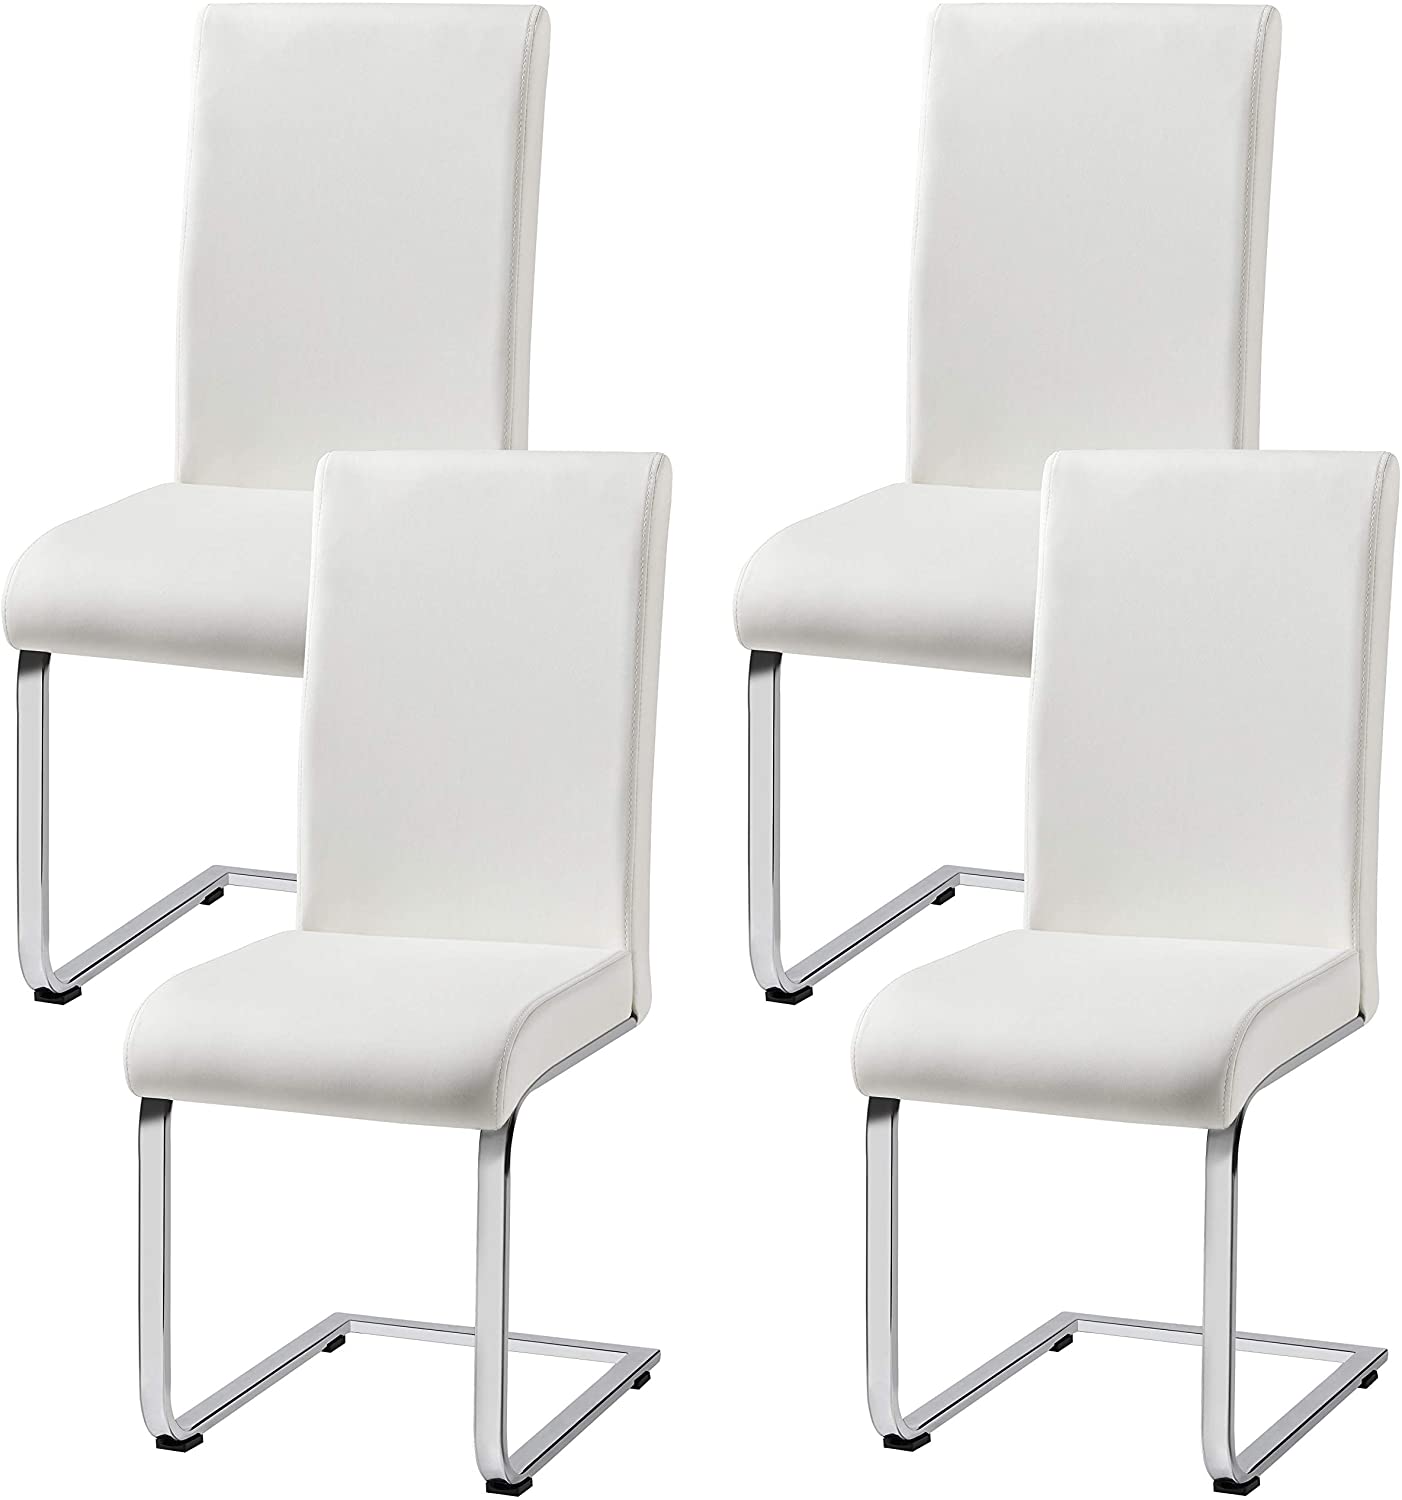 B08LSX2FLG Topeakmart 4pcs Dining Chairs Armless Dining/Living Room Kitchen Chairs PU Leather Upholstered Seat and Metal Legs Side Chairs with High Back Modern, White